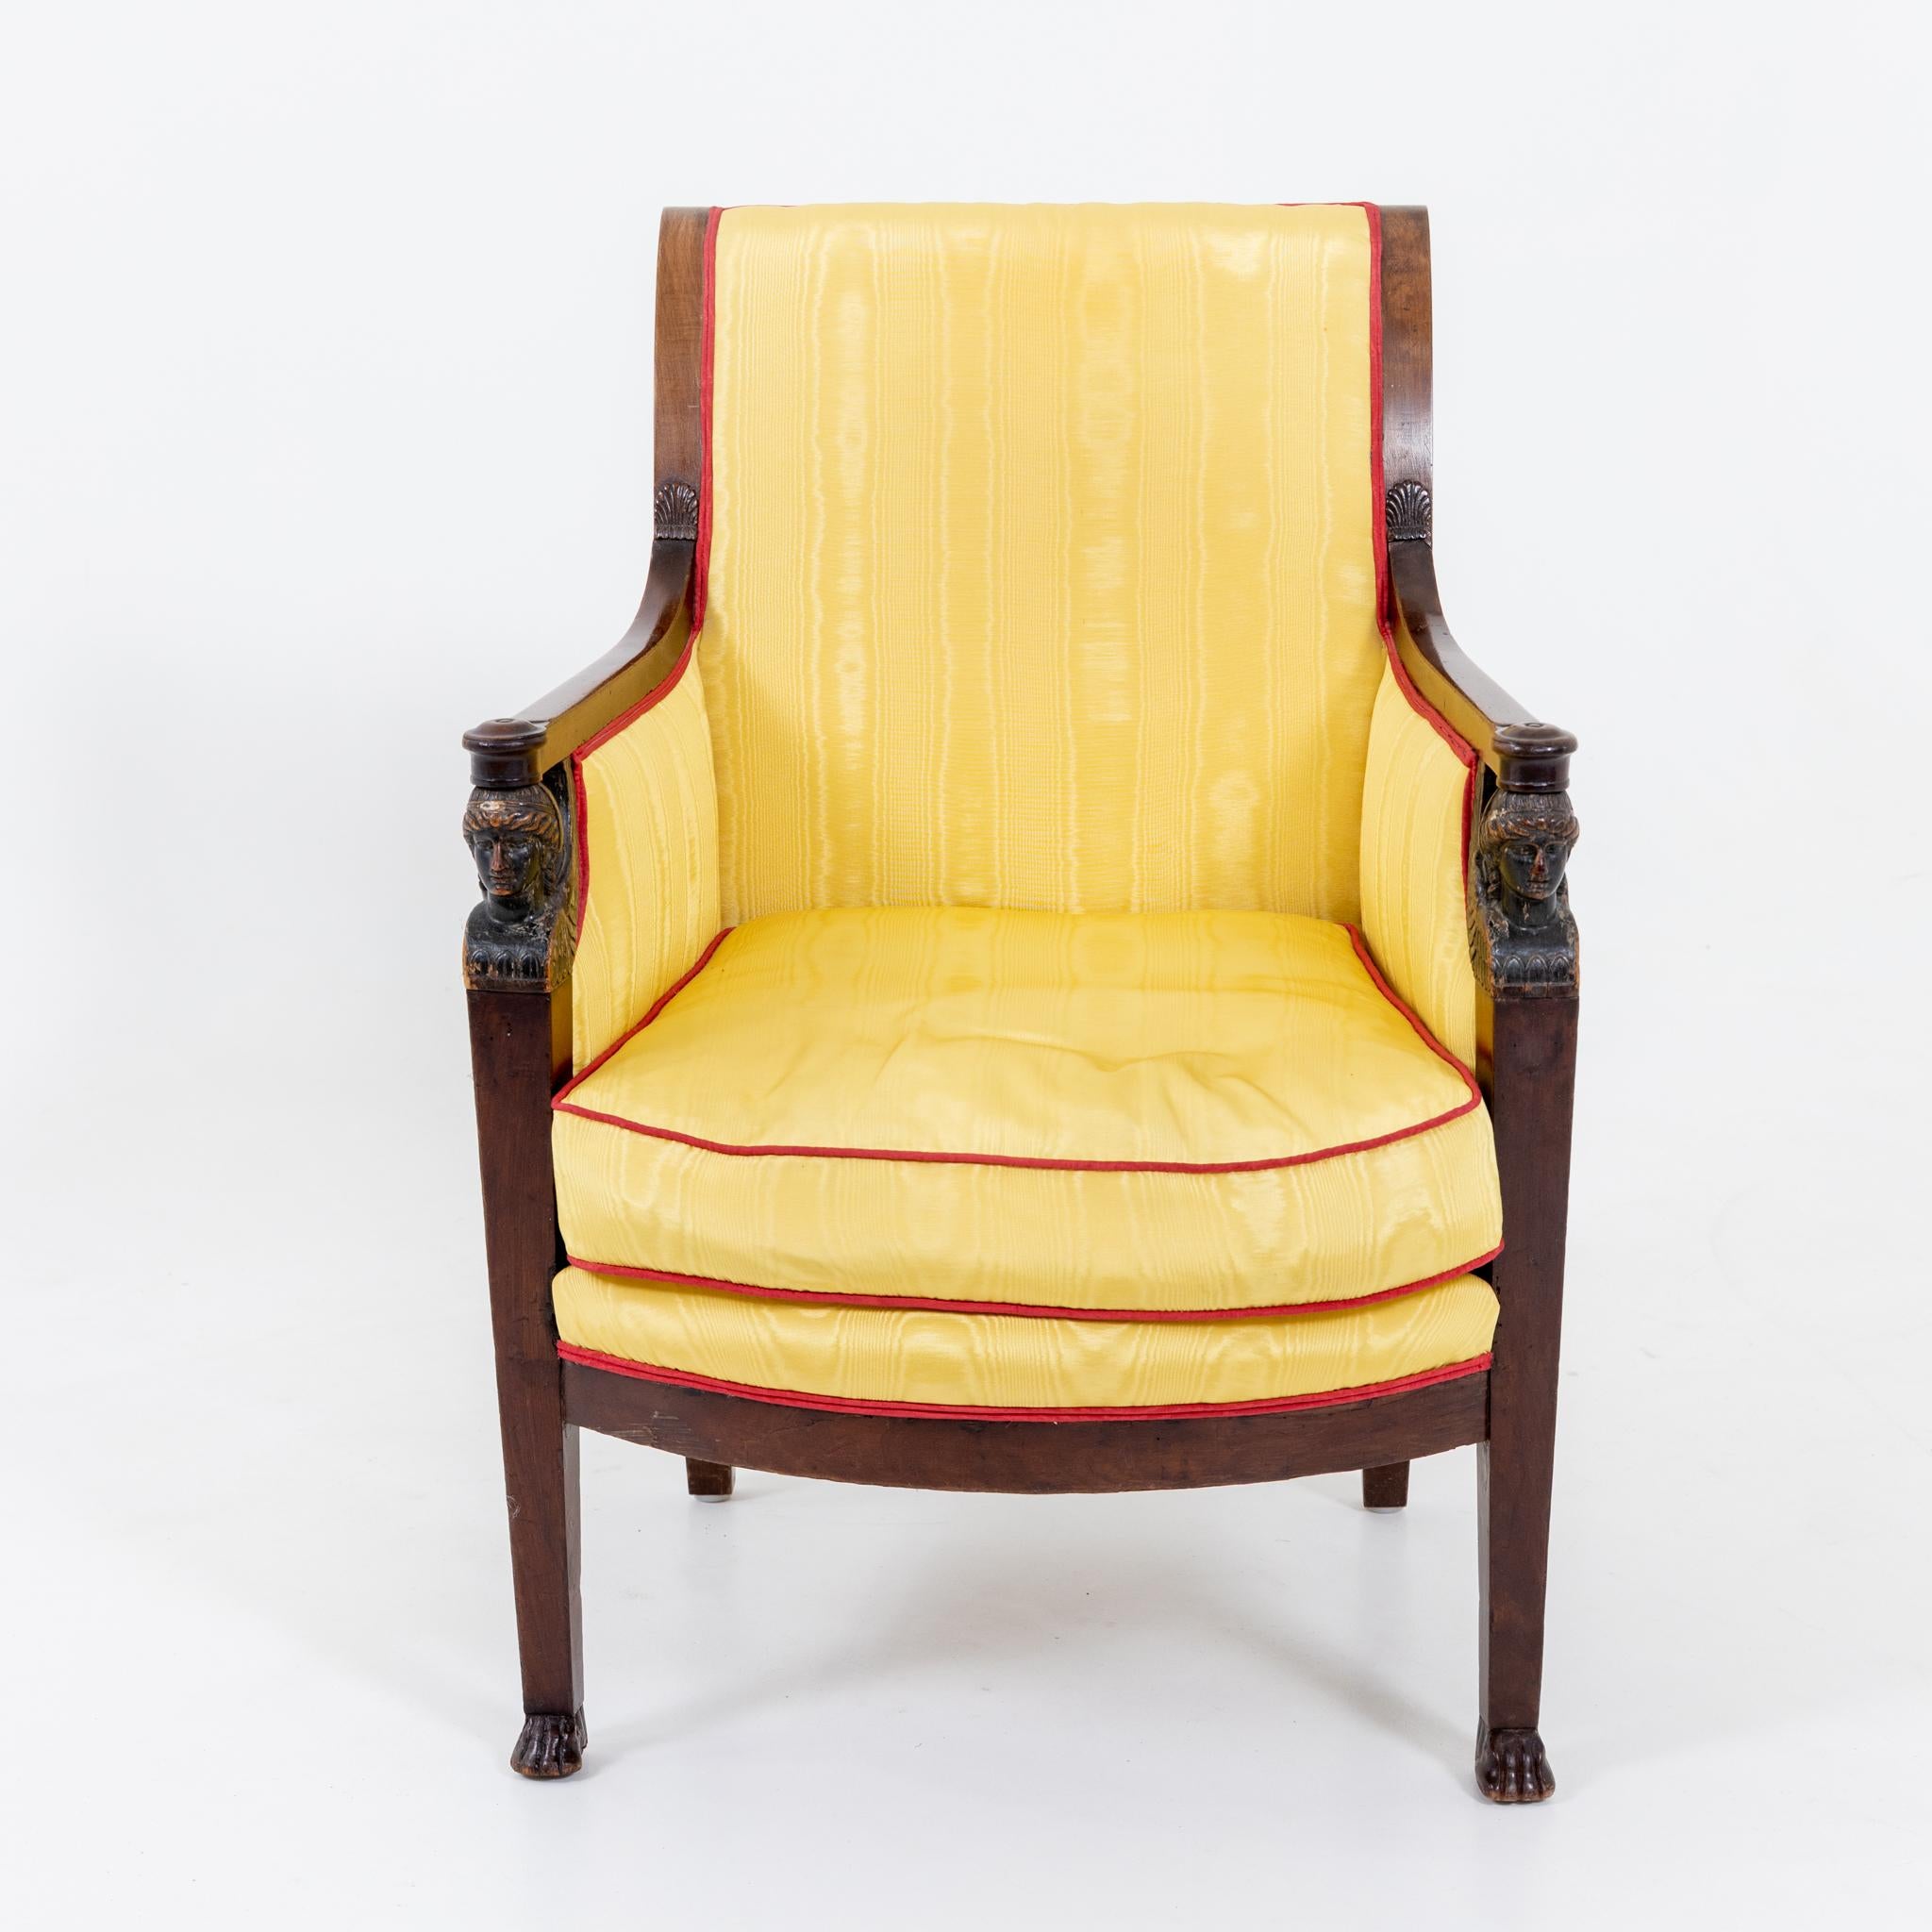 Empire fauteuil in mahogany and yellow silk morée upholstery with red piping and carved winged caryatids, France c. 1800. Lit.: J. Mottheau, Meubles et Emsembles Directoire Empire, Tf. 20.